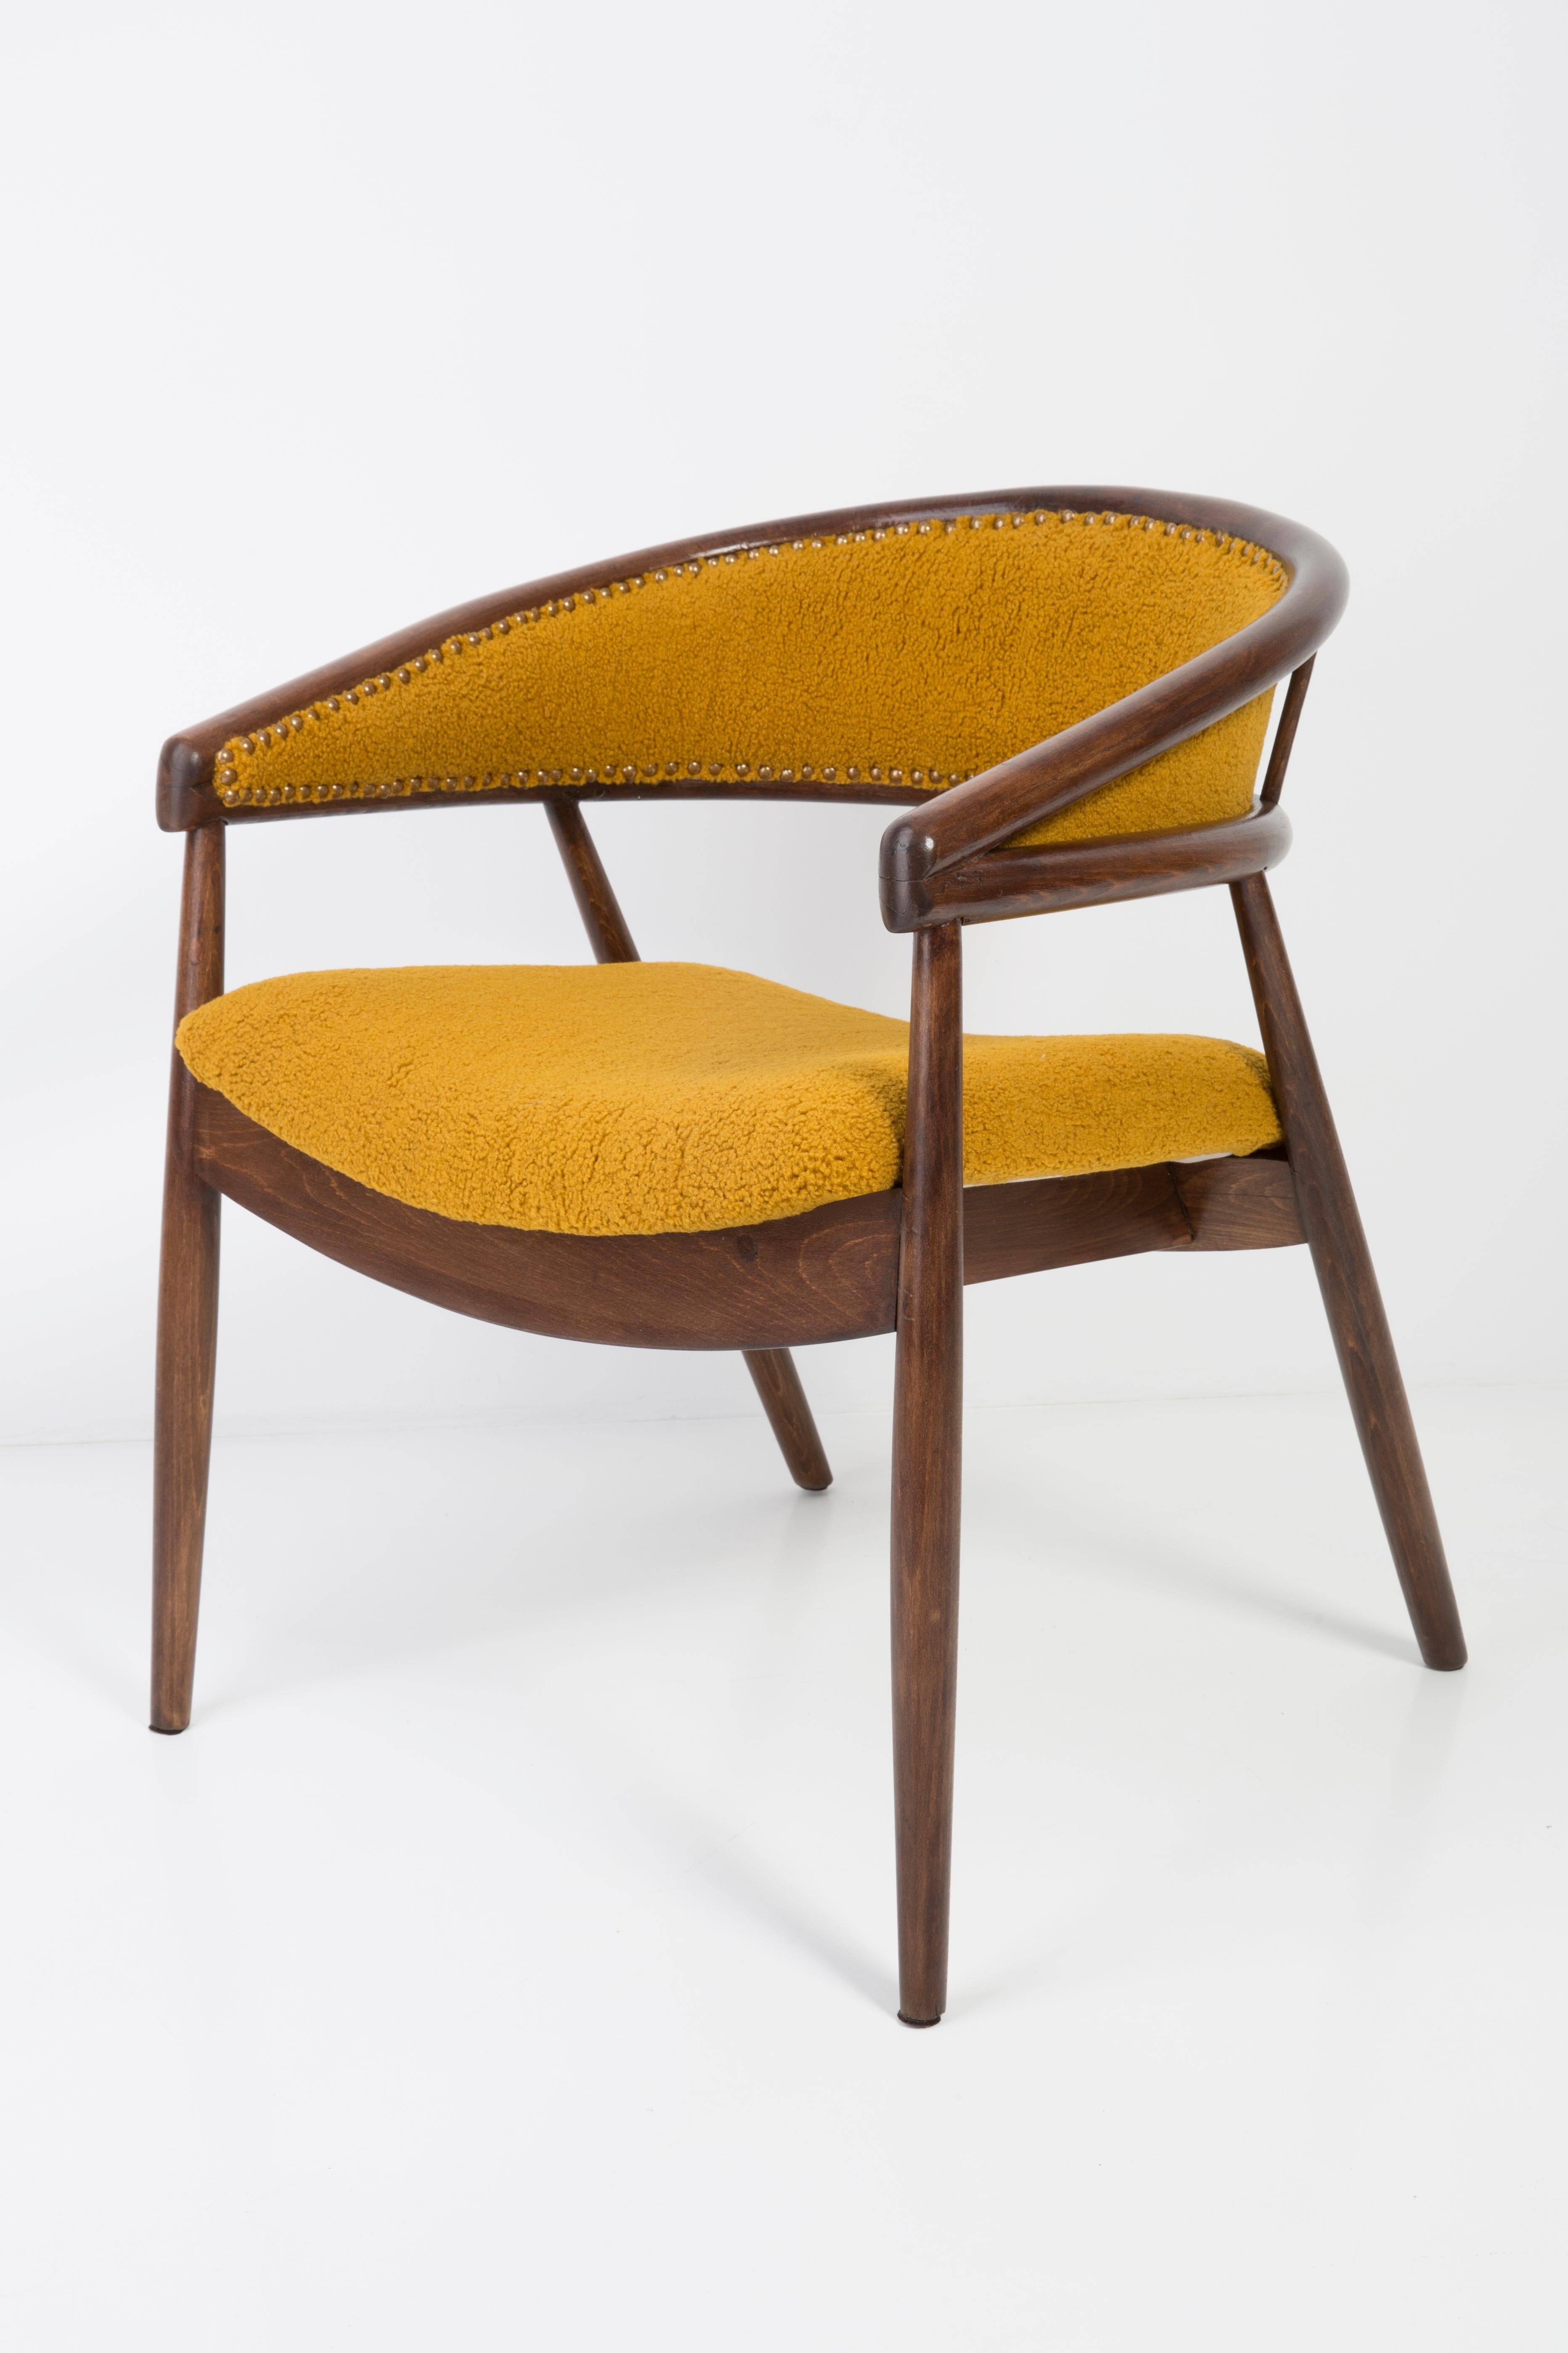 Set of Two James Mont Bent Beech Armchairs, Yellow Ochra Boucle, 1960s For Sale 6